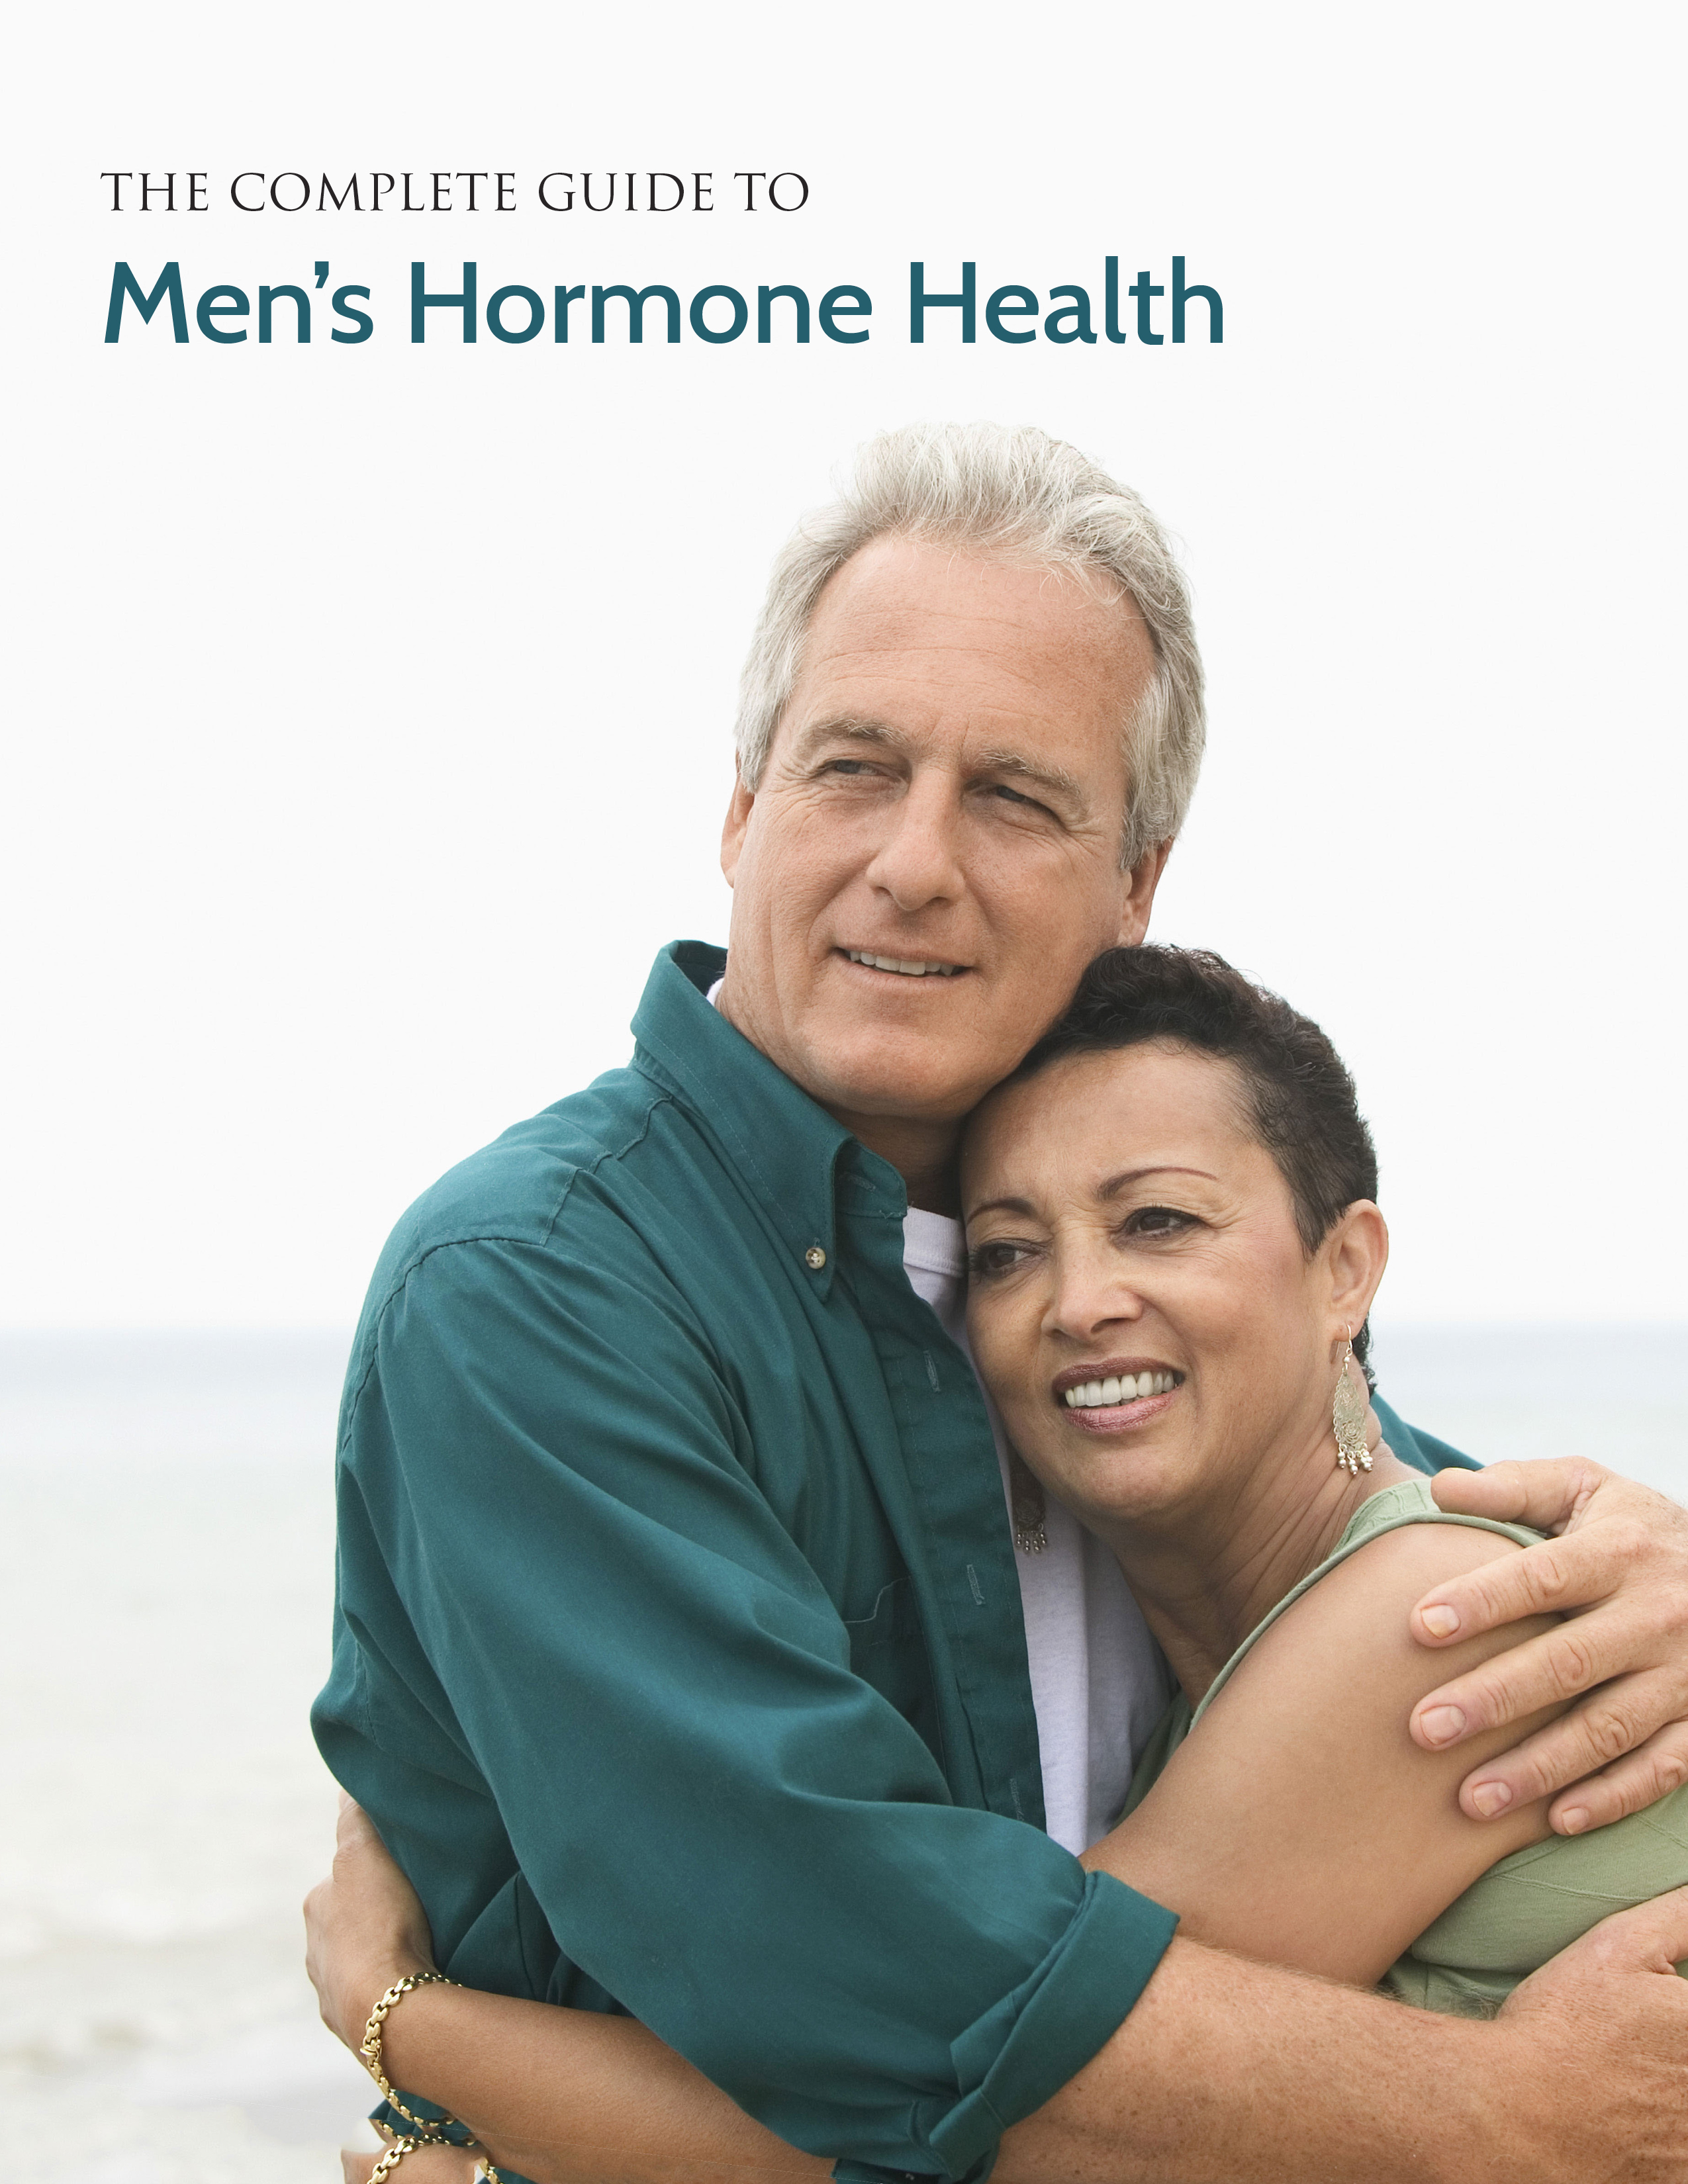 Men's Complete Guide to Hormone Health Page 1